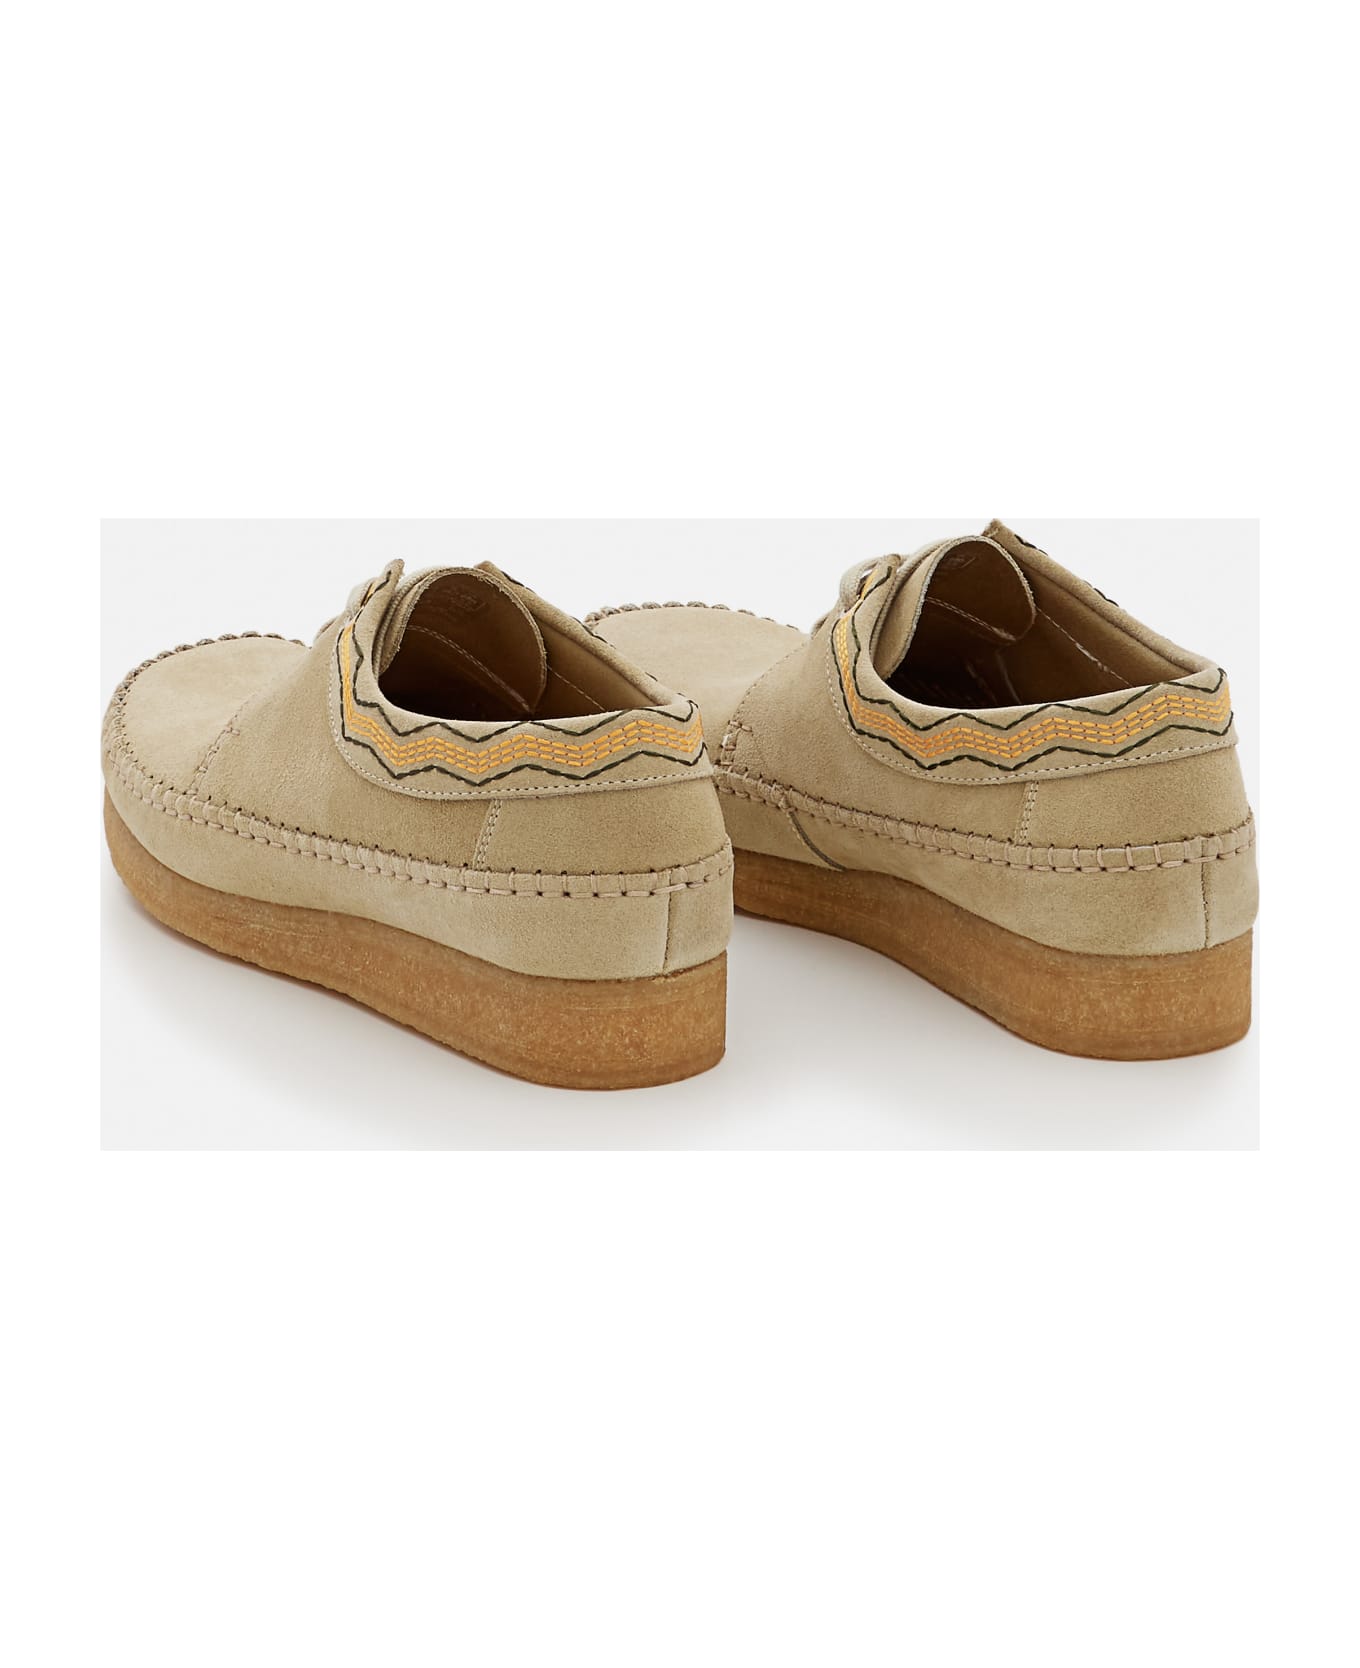 Clarks "weaver" Suede Lace-up Shoes - Beige レースアップシューズ